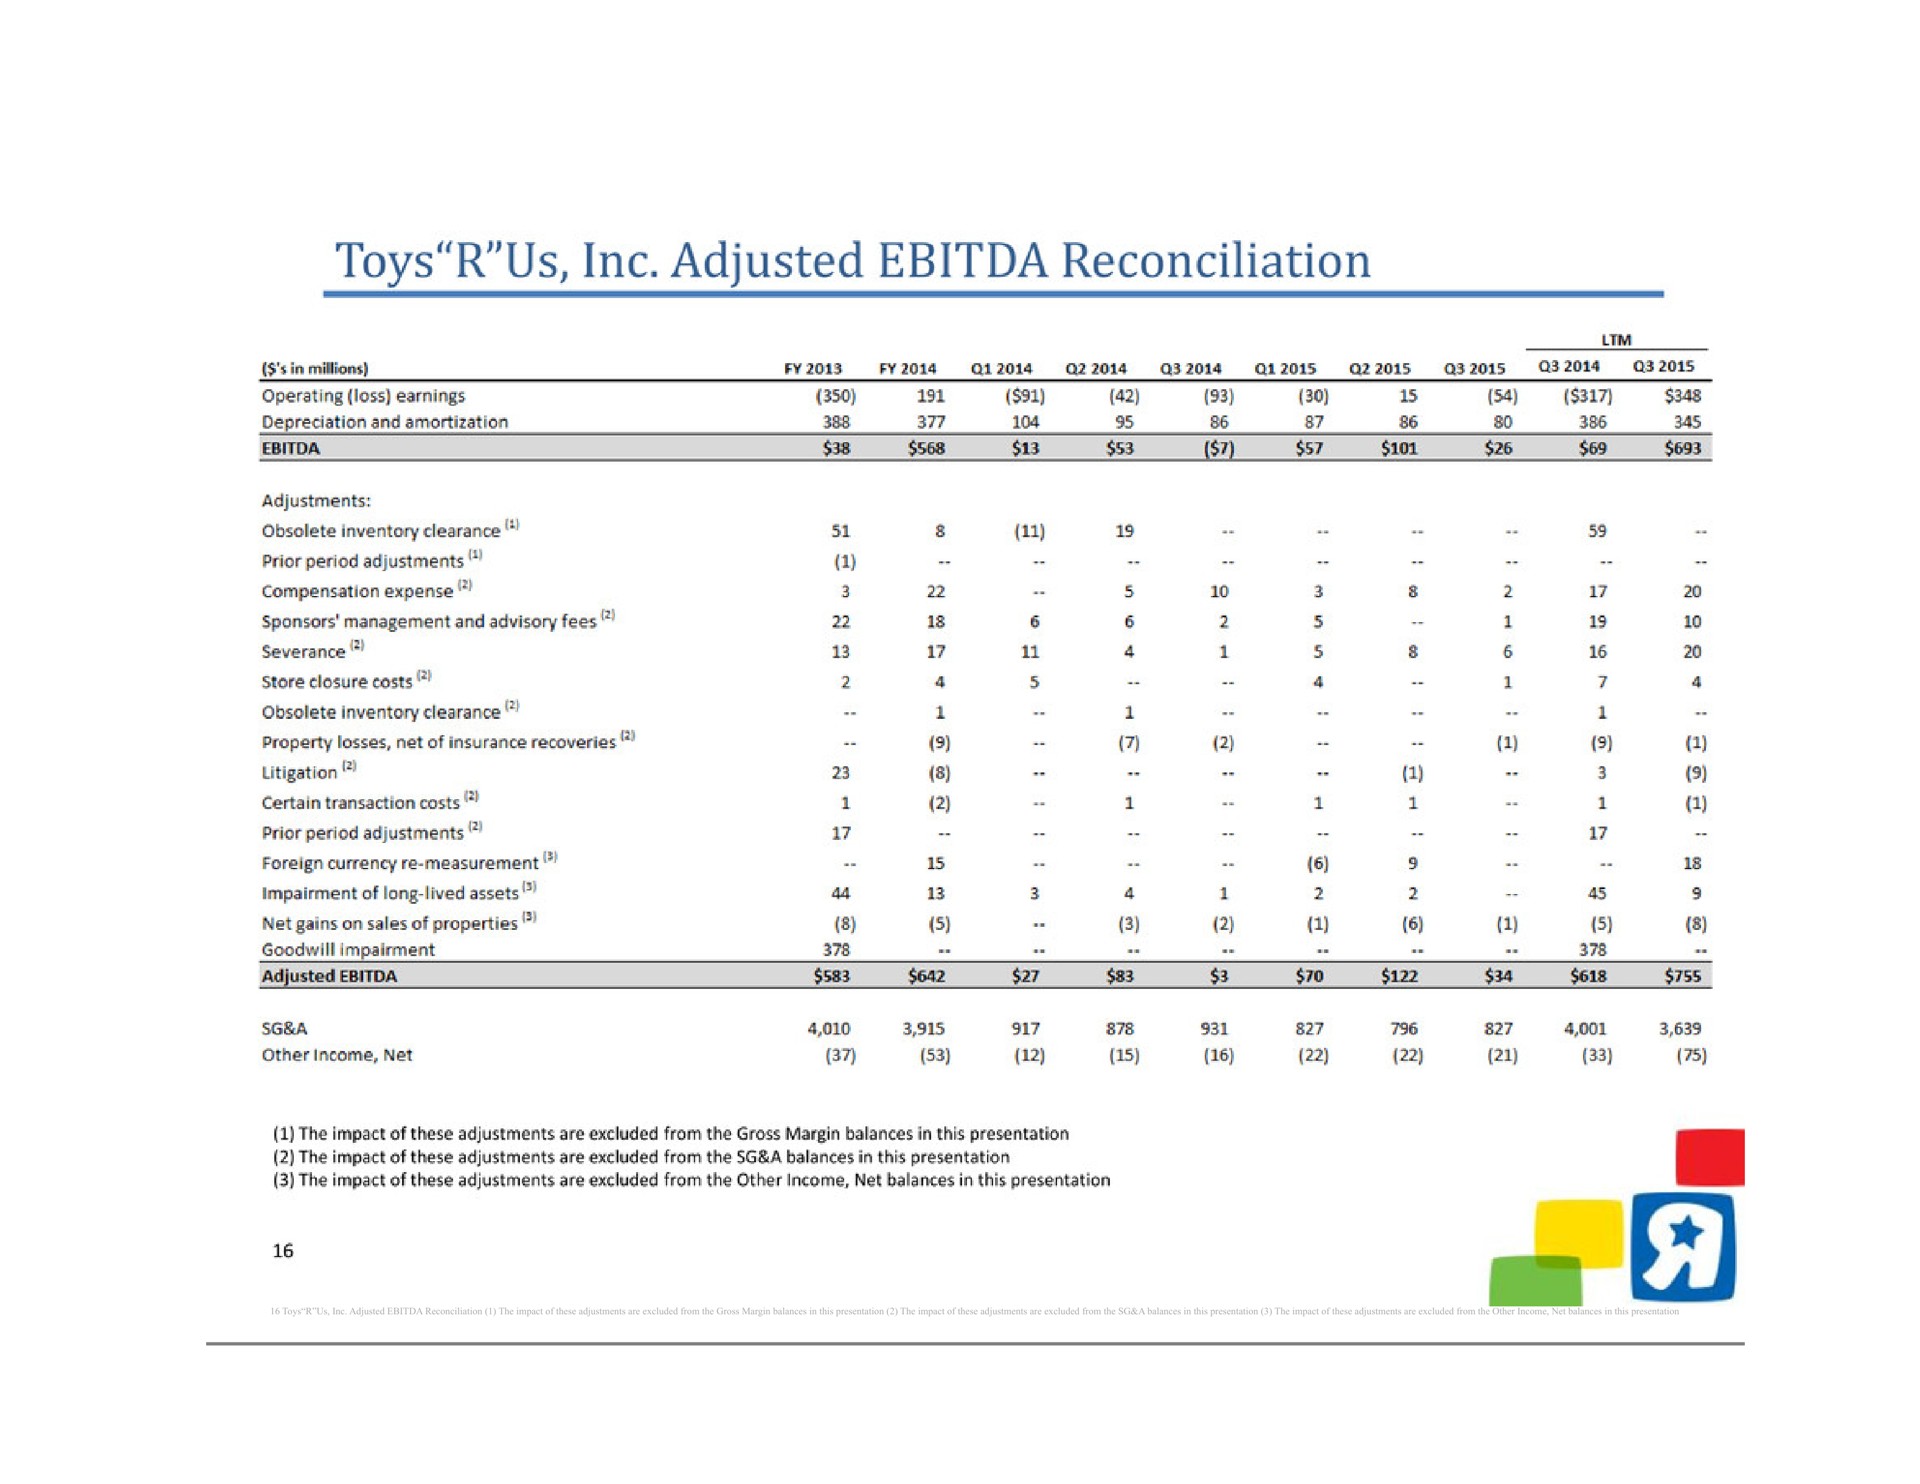 toys us adjusted reconciliation the impact of these adjustments are excluded from the gross margin balances in this presentation the impact of these adjustments are excluded from the a balances in this presentation the impact of these adjustments are excluded from the other income net balances in this presentation | Toys R Us